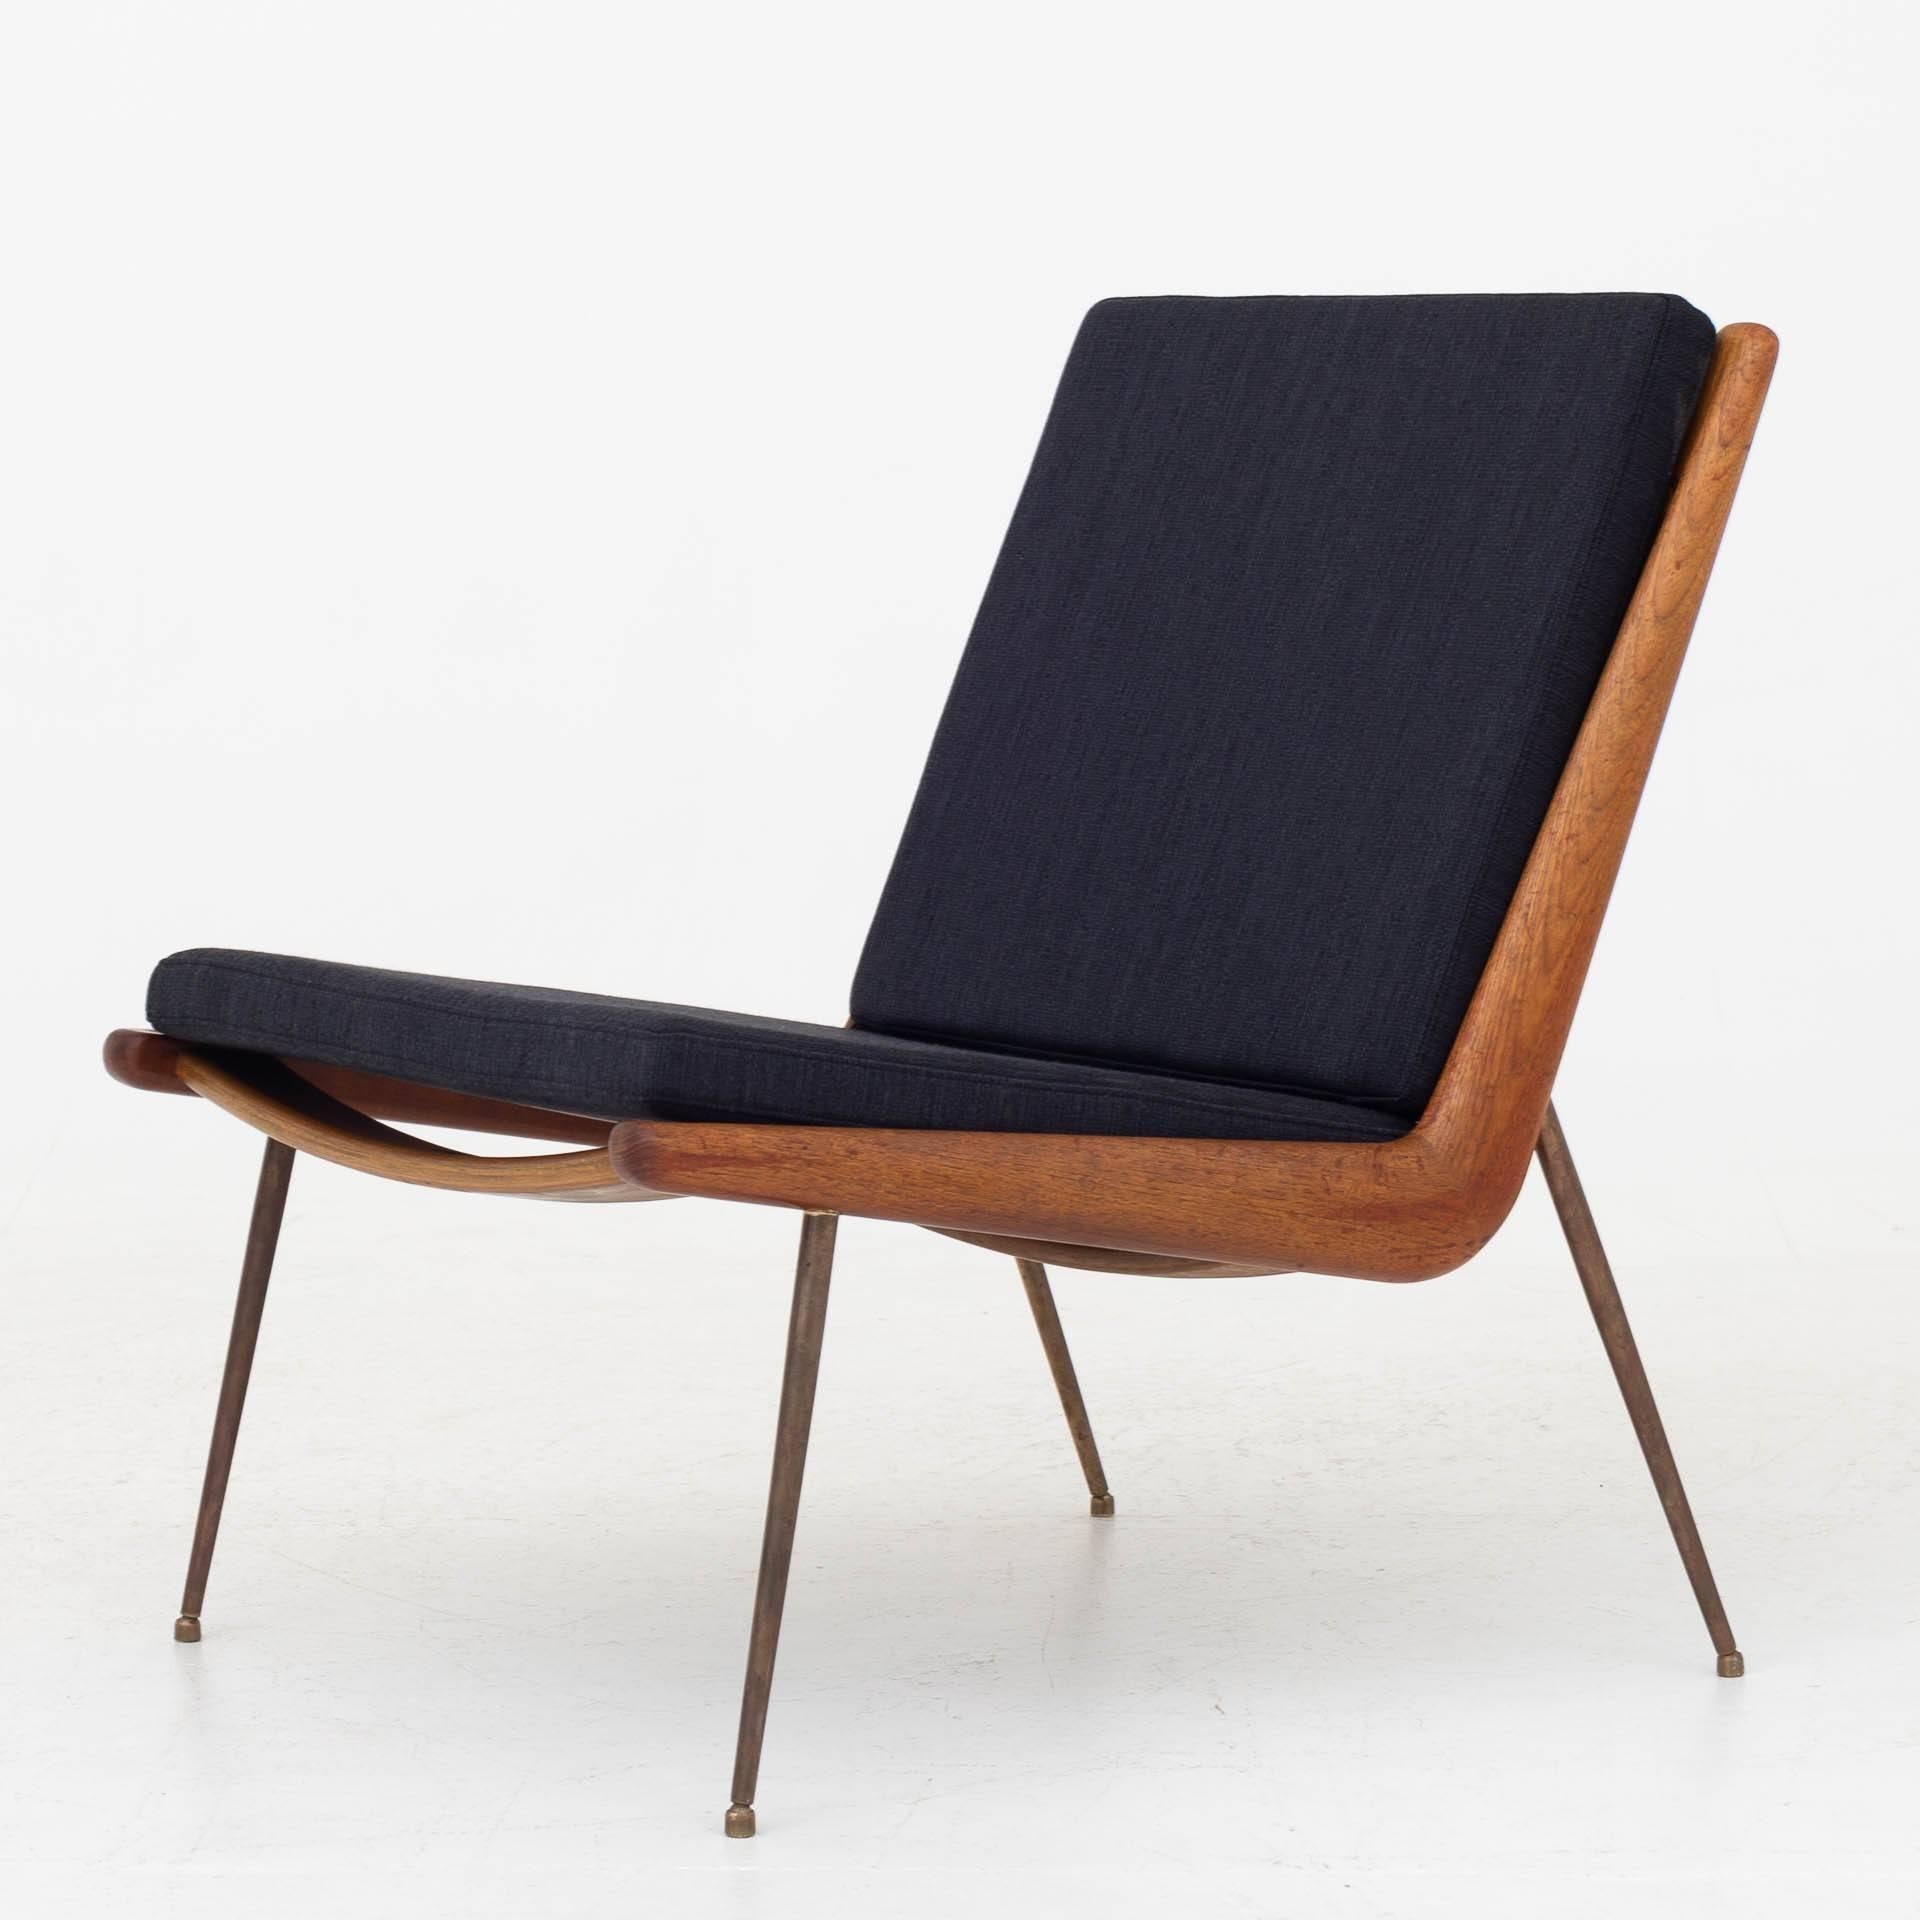 'Boomerang' easy chair in teak with legs of brass and new cushions in wool from Kvadrat (Balder 3, 192). Model with arms also available.  Maker France & Son.